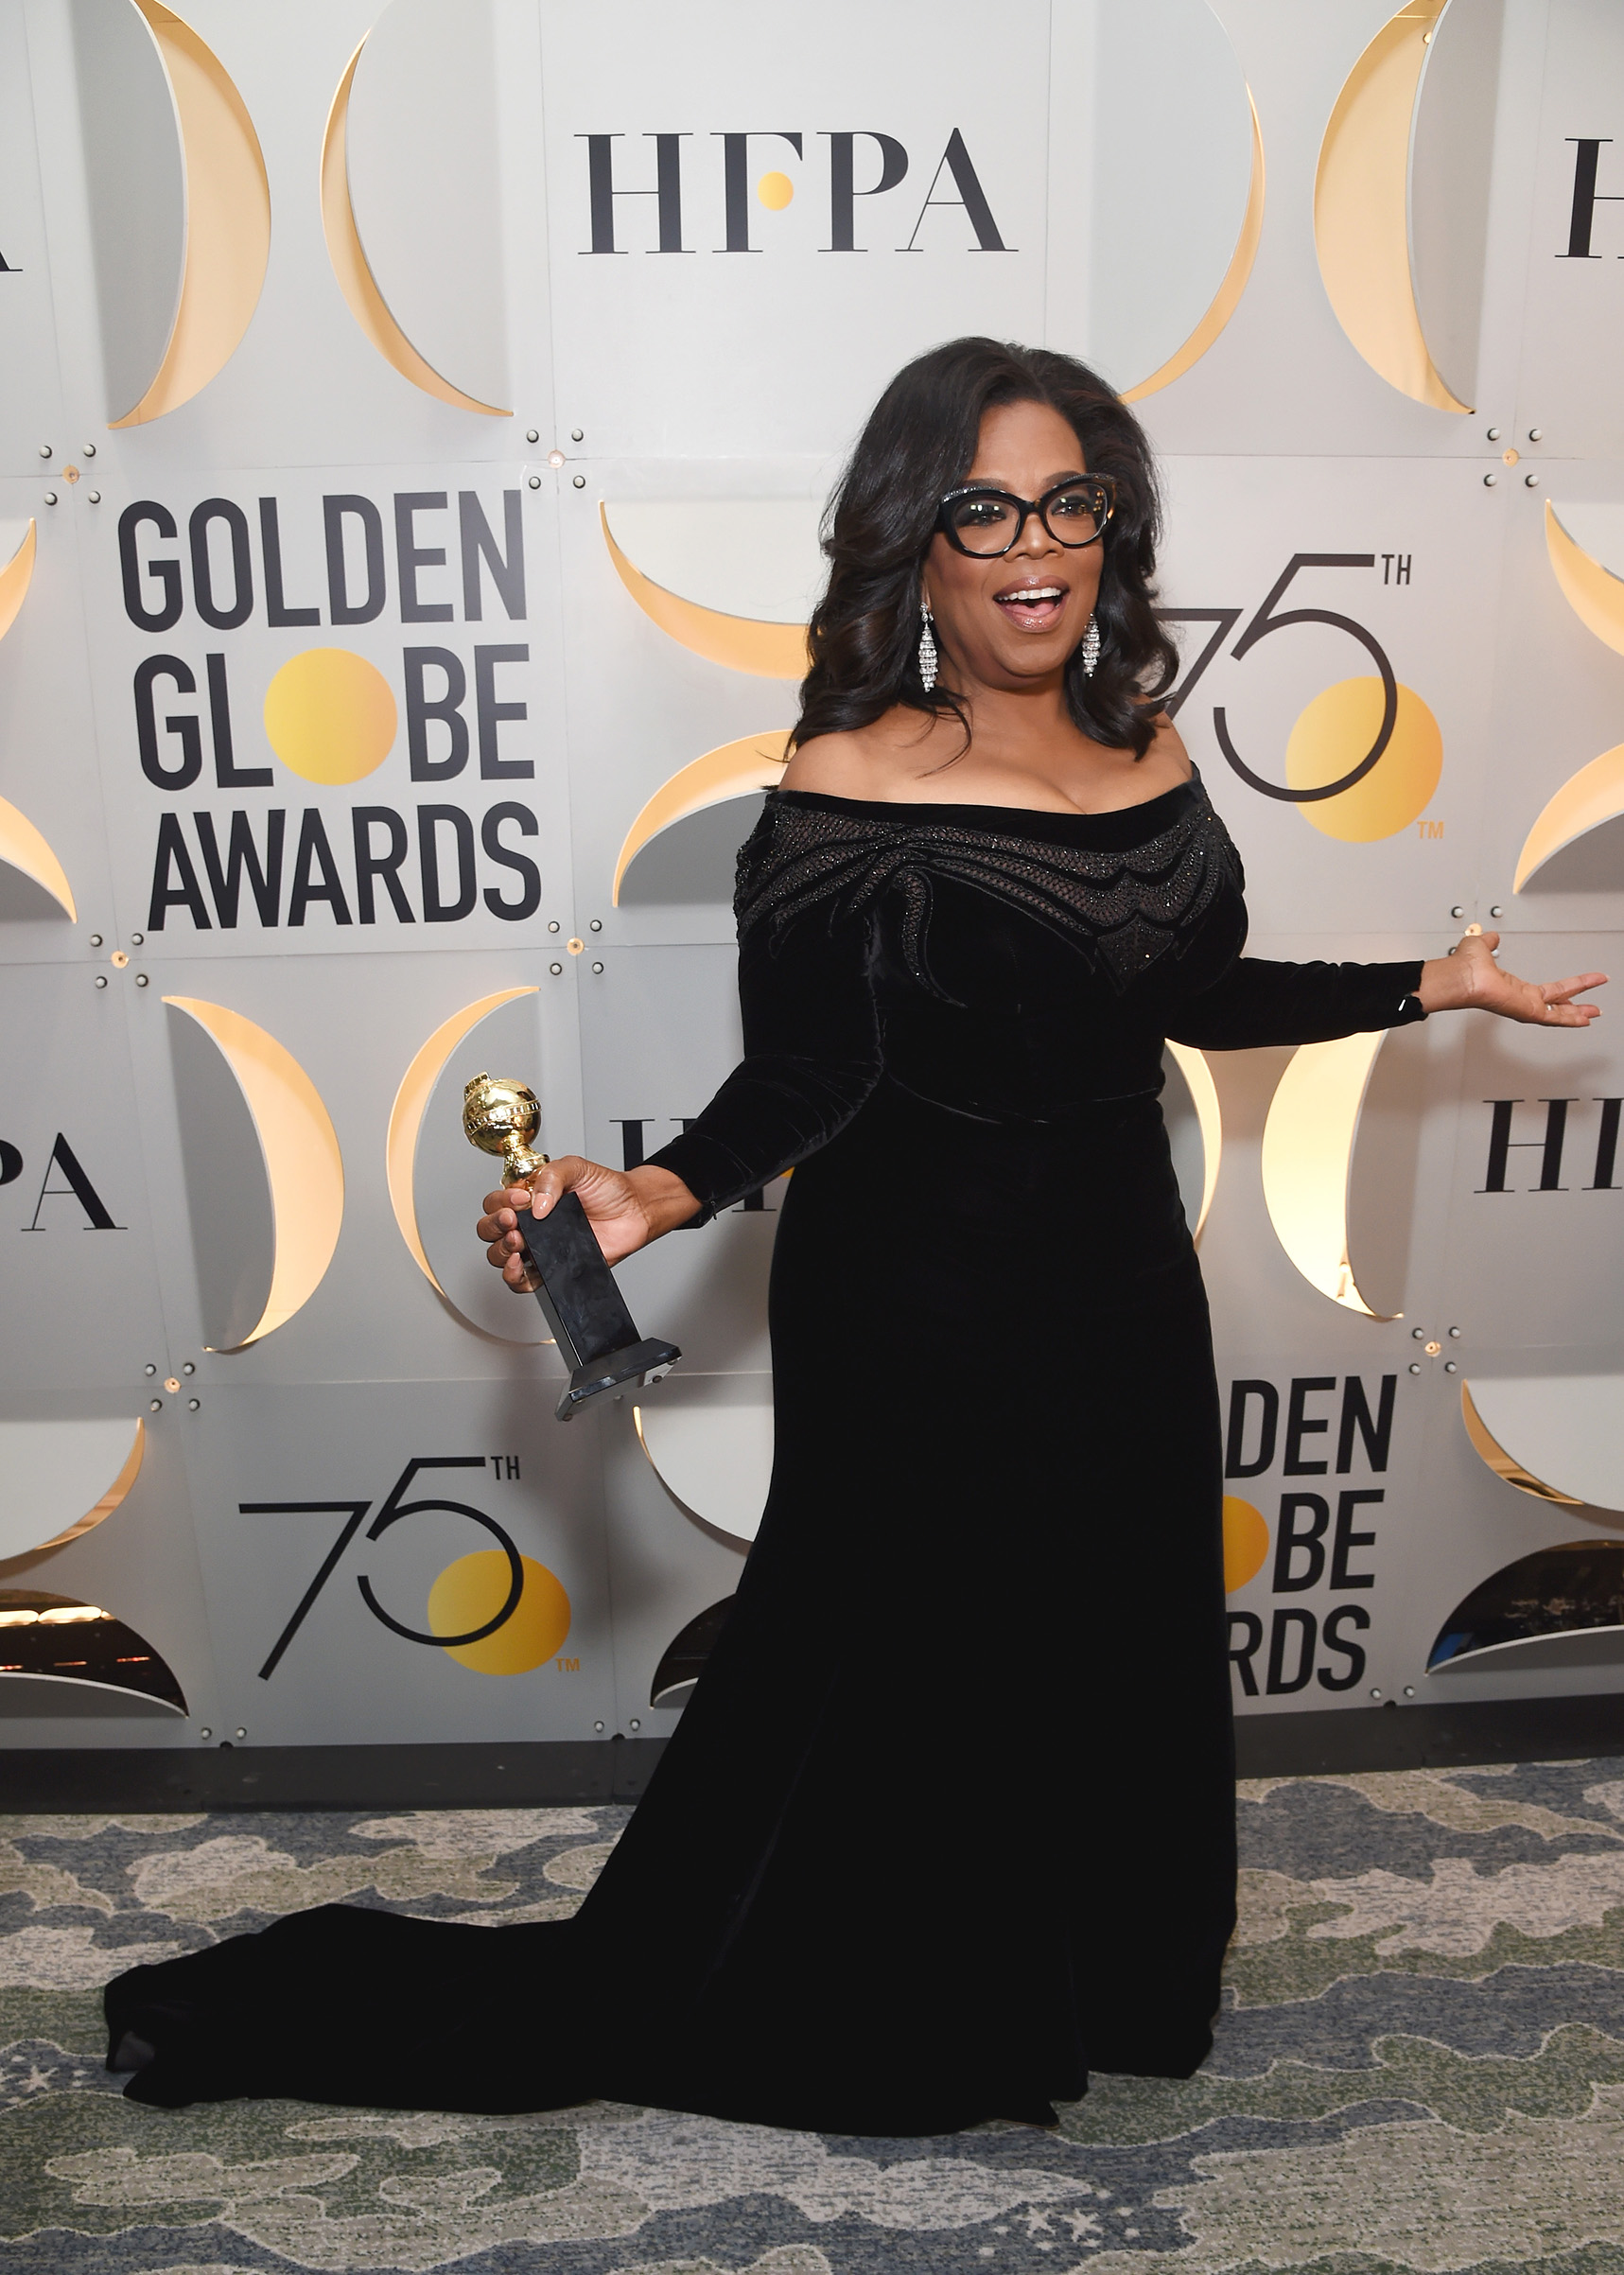 Oprah Winfrey celebrates The 75th Annual Golden Globe Awards with Moet &amp; Chandon at The Beverly Hilton Hotel on January 7, 2018 in Beverly Hills, California.